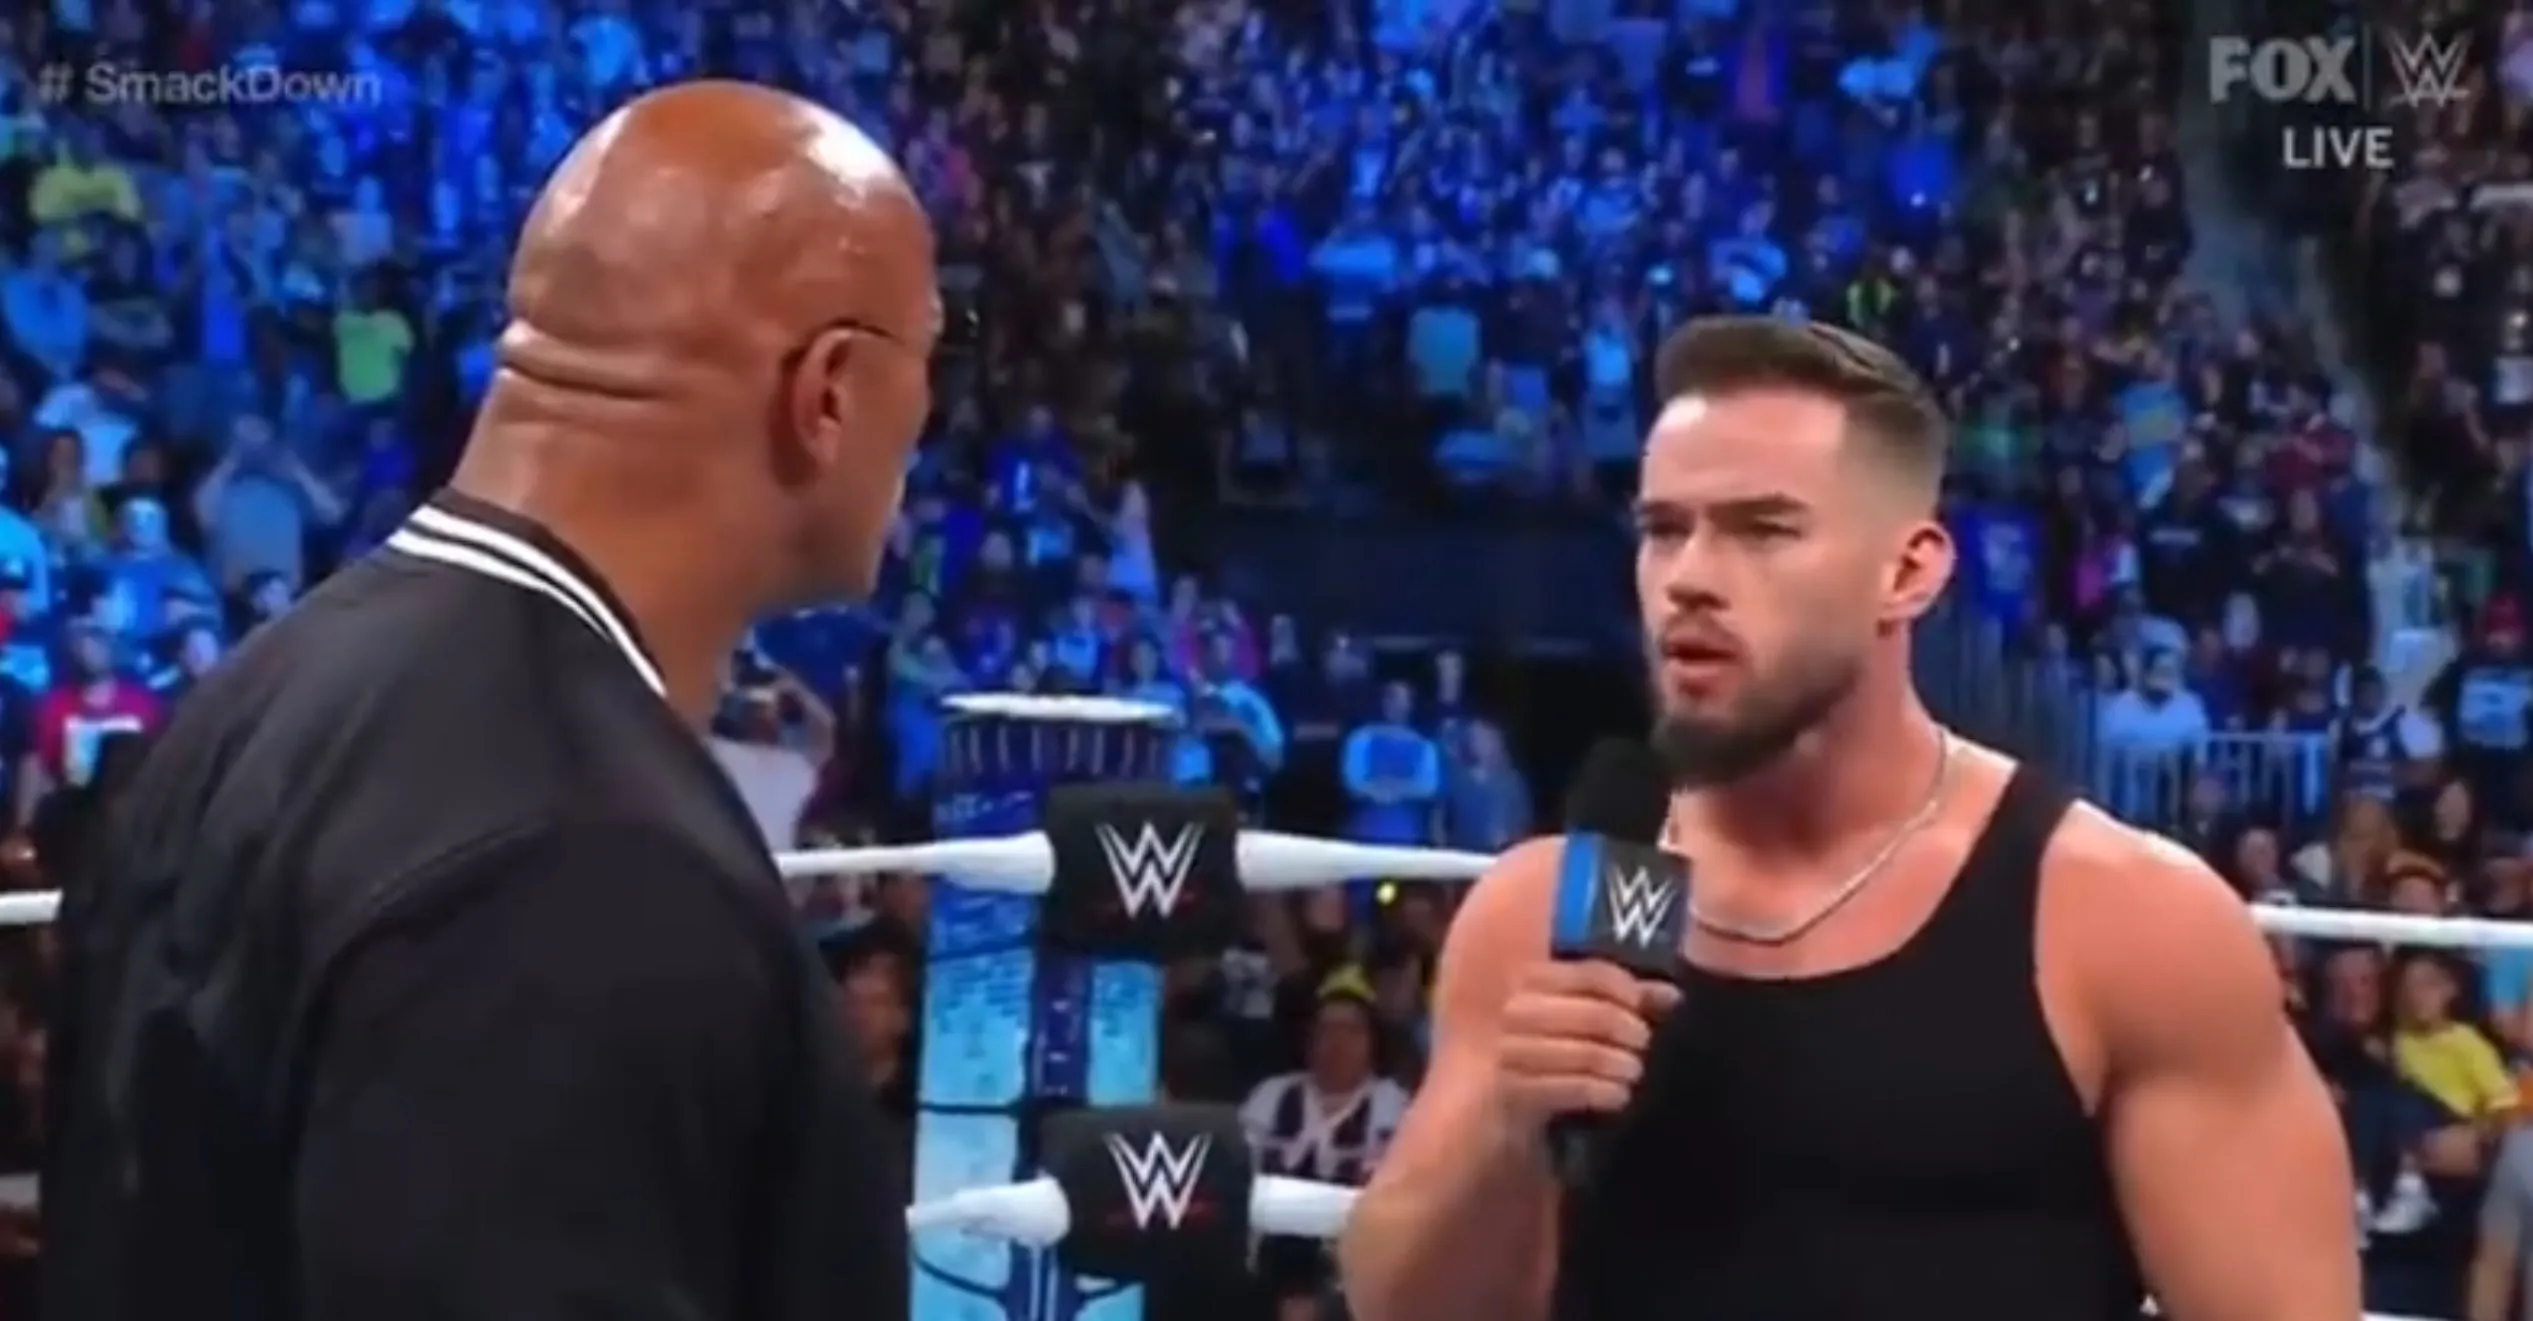 The Rock makes a comeback to WWE on SmackDown